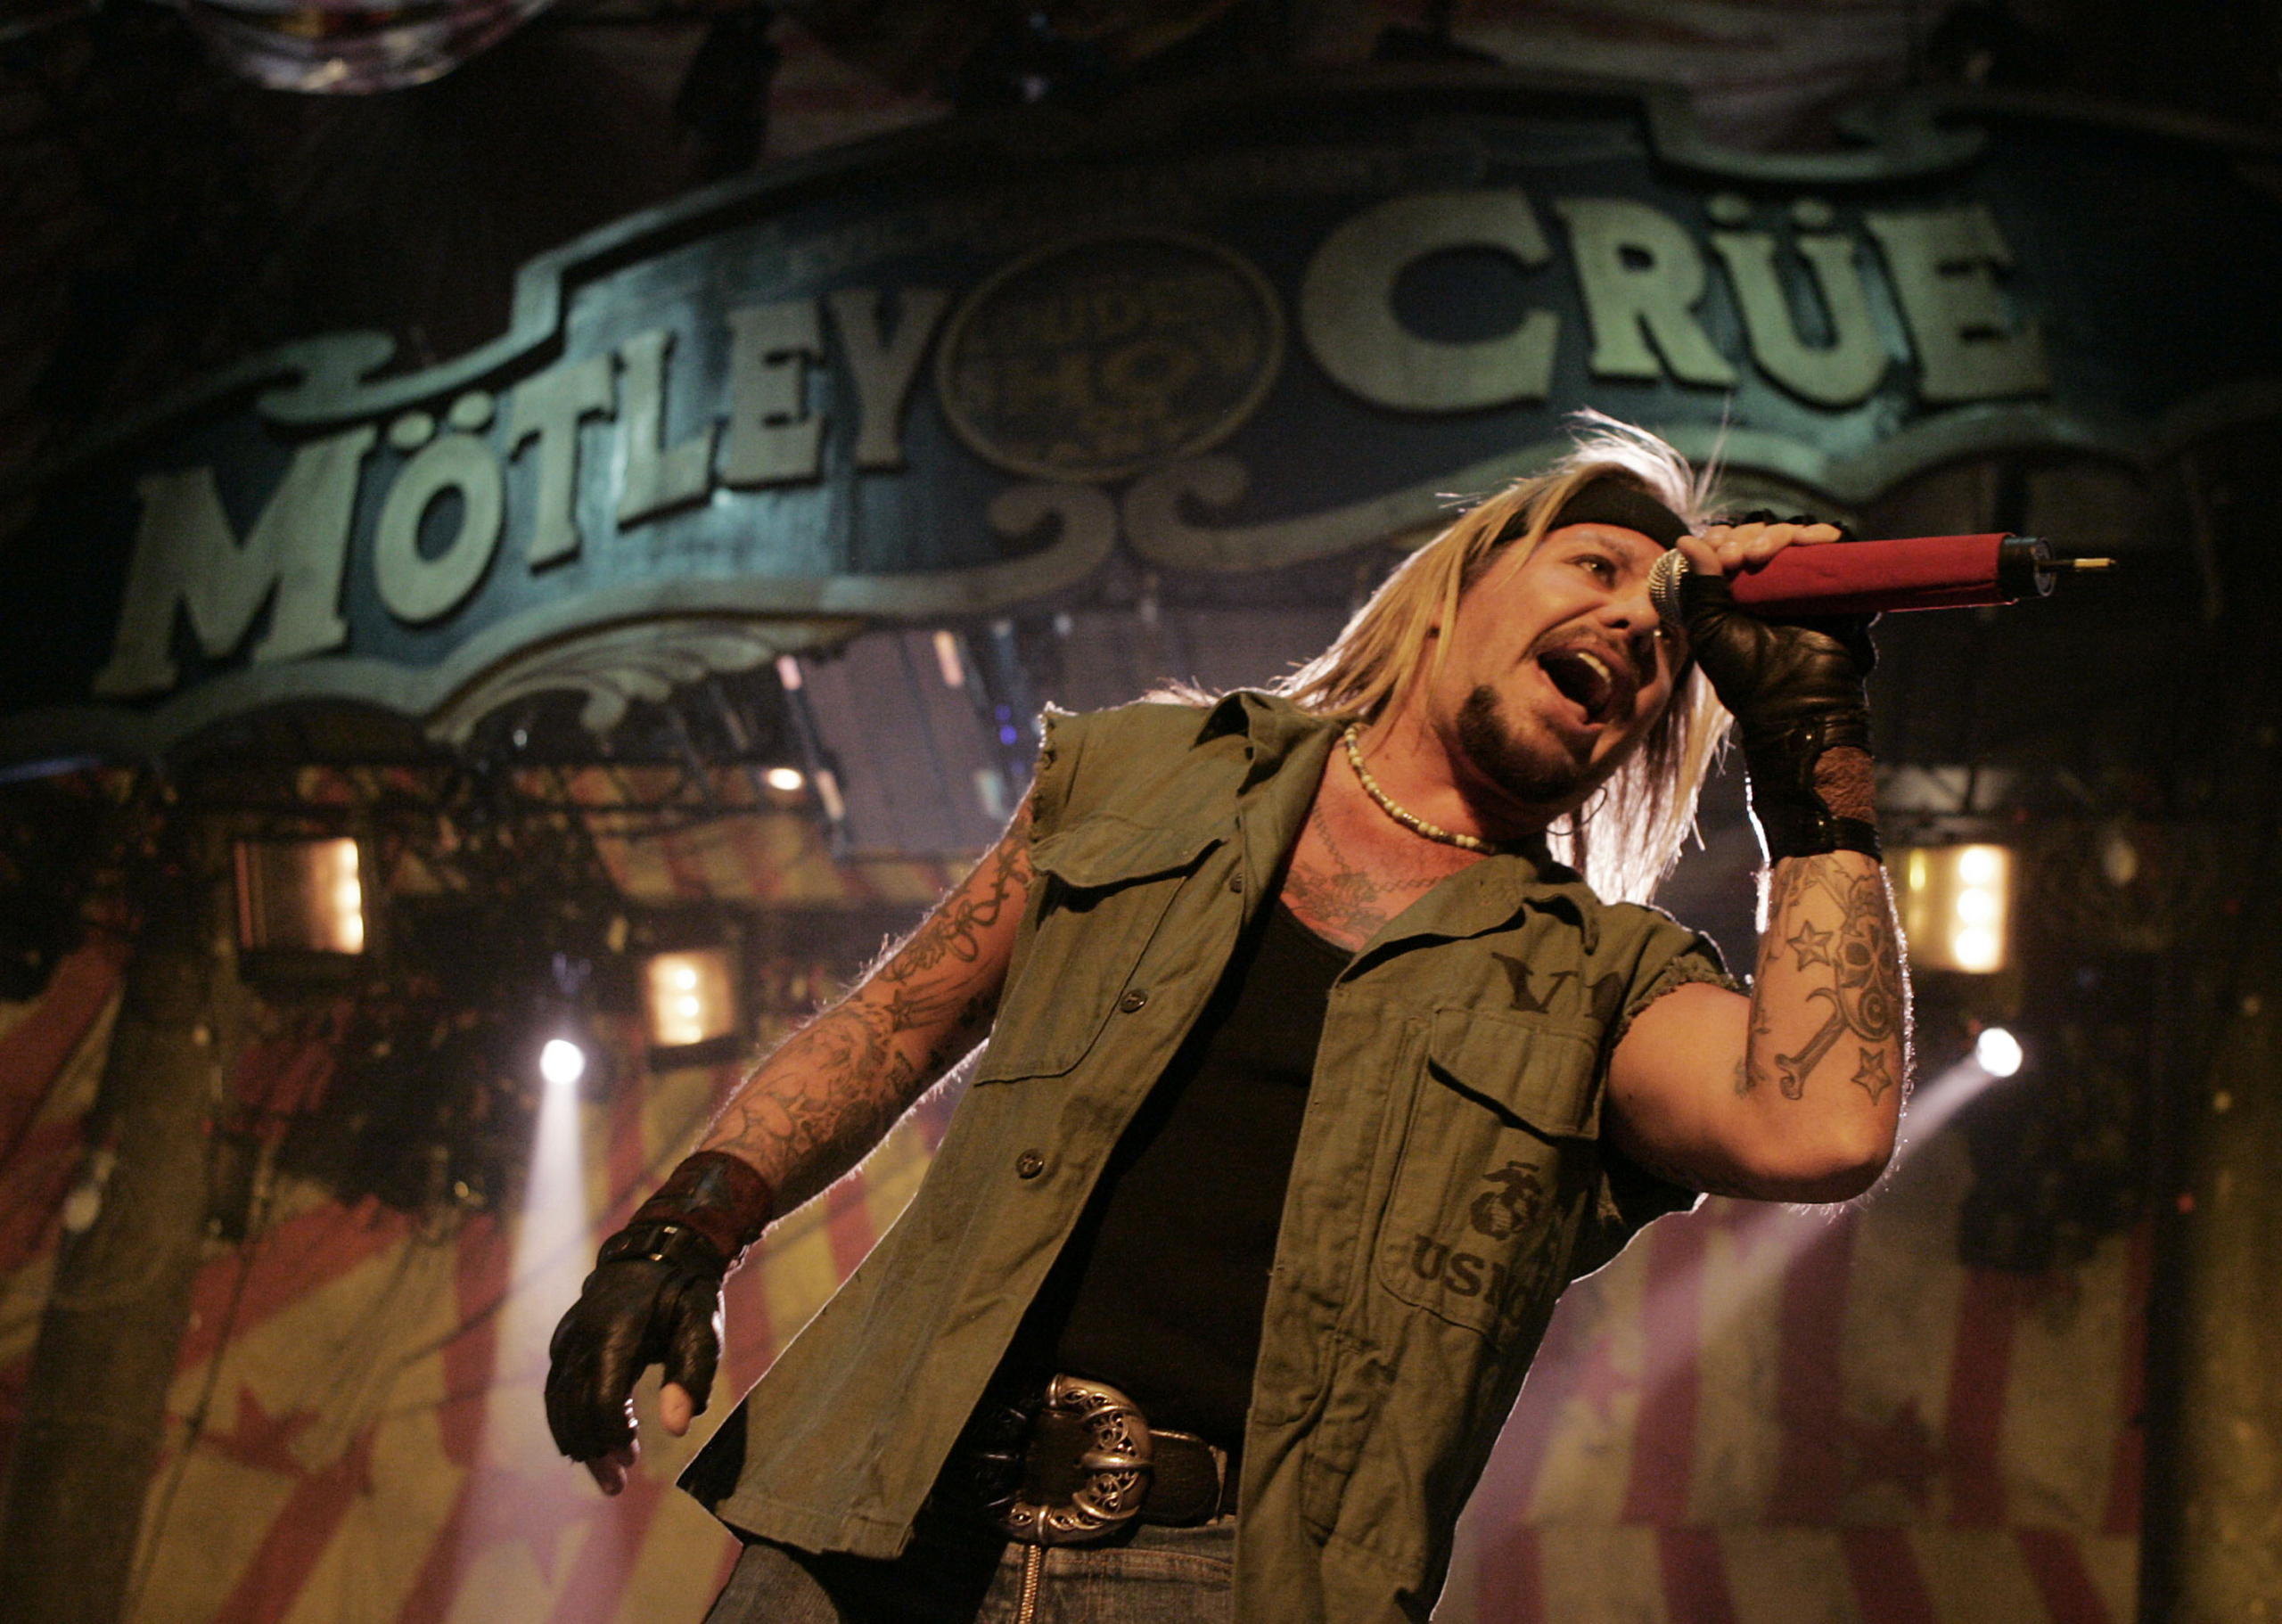 Motley Crue and Def Leppard are taking THE Stadium Tour World Wide!